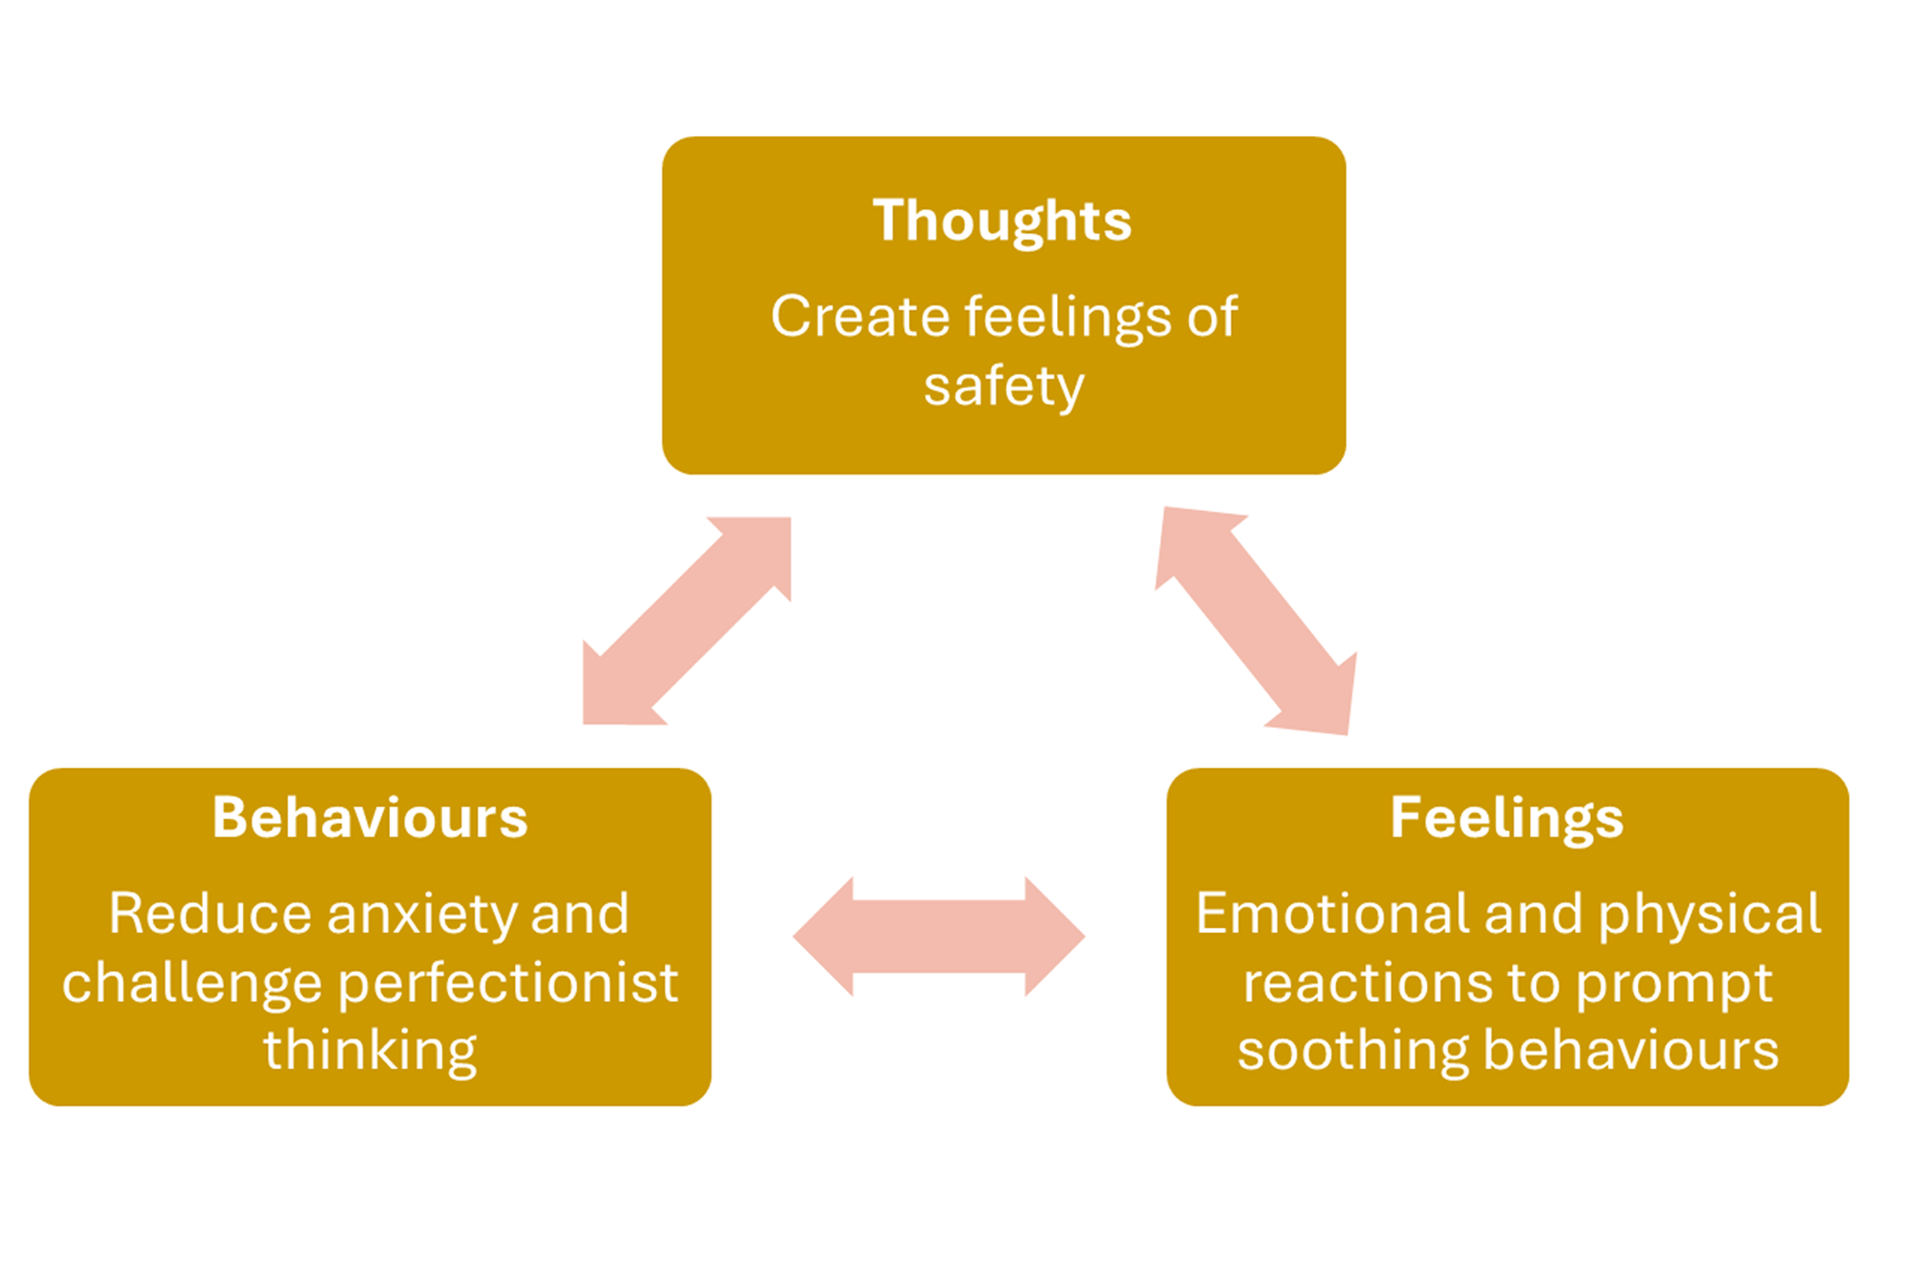 Three boxes connected by arrows to show a safety thought cycle. The first box reads, 'Thoughts create feelings of safety'. The second box reads, 'Feelings. Emotional and physical reactions to prompt soothing behaviours'. The third box reads, 'Behaviours. Reduce anxiety and challenge perfectionist thinking.'